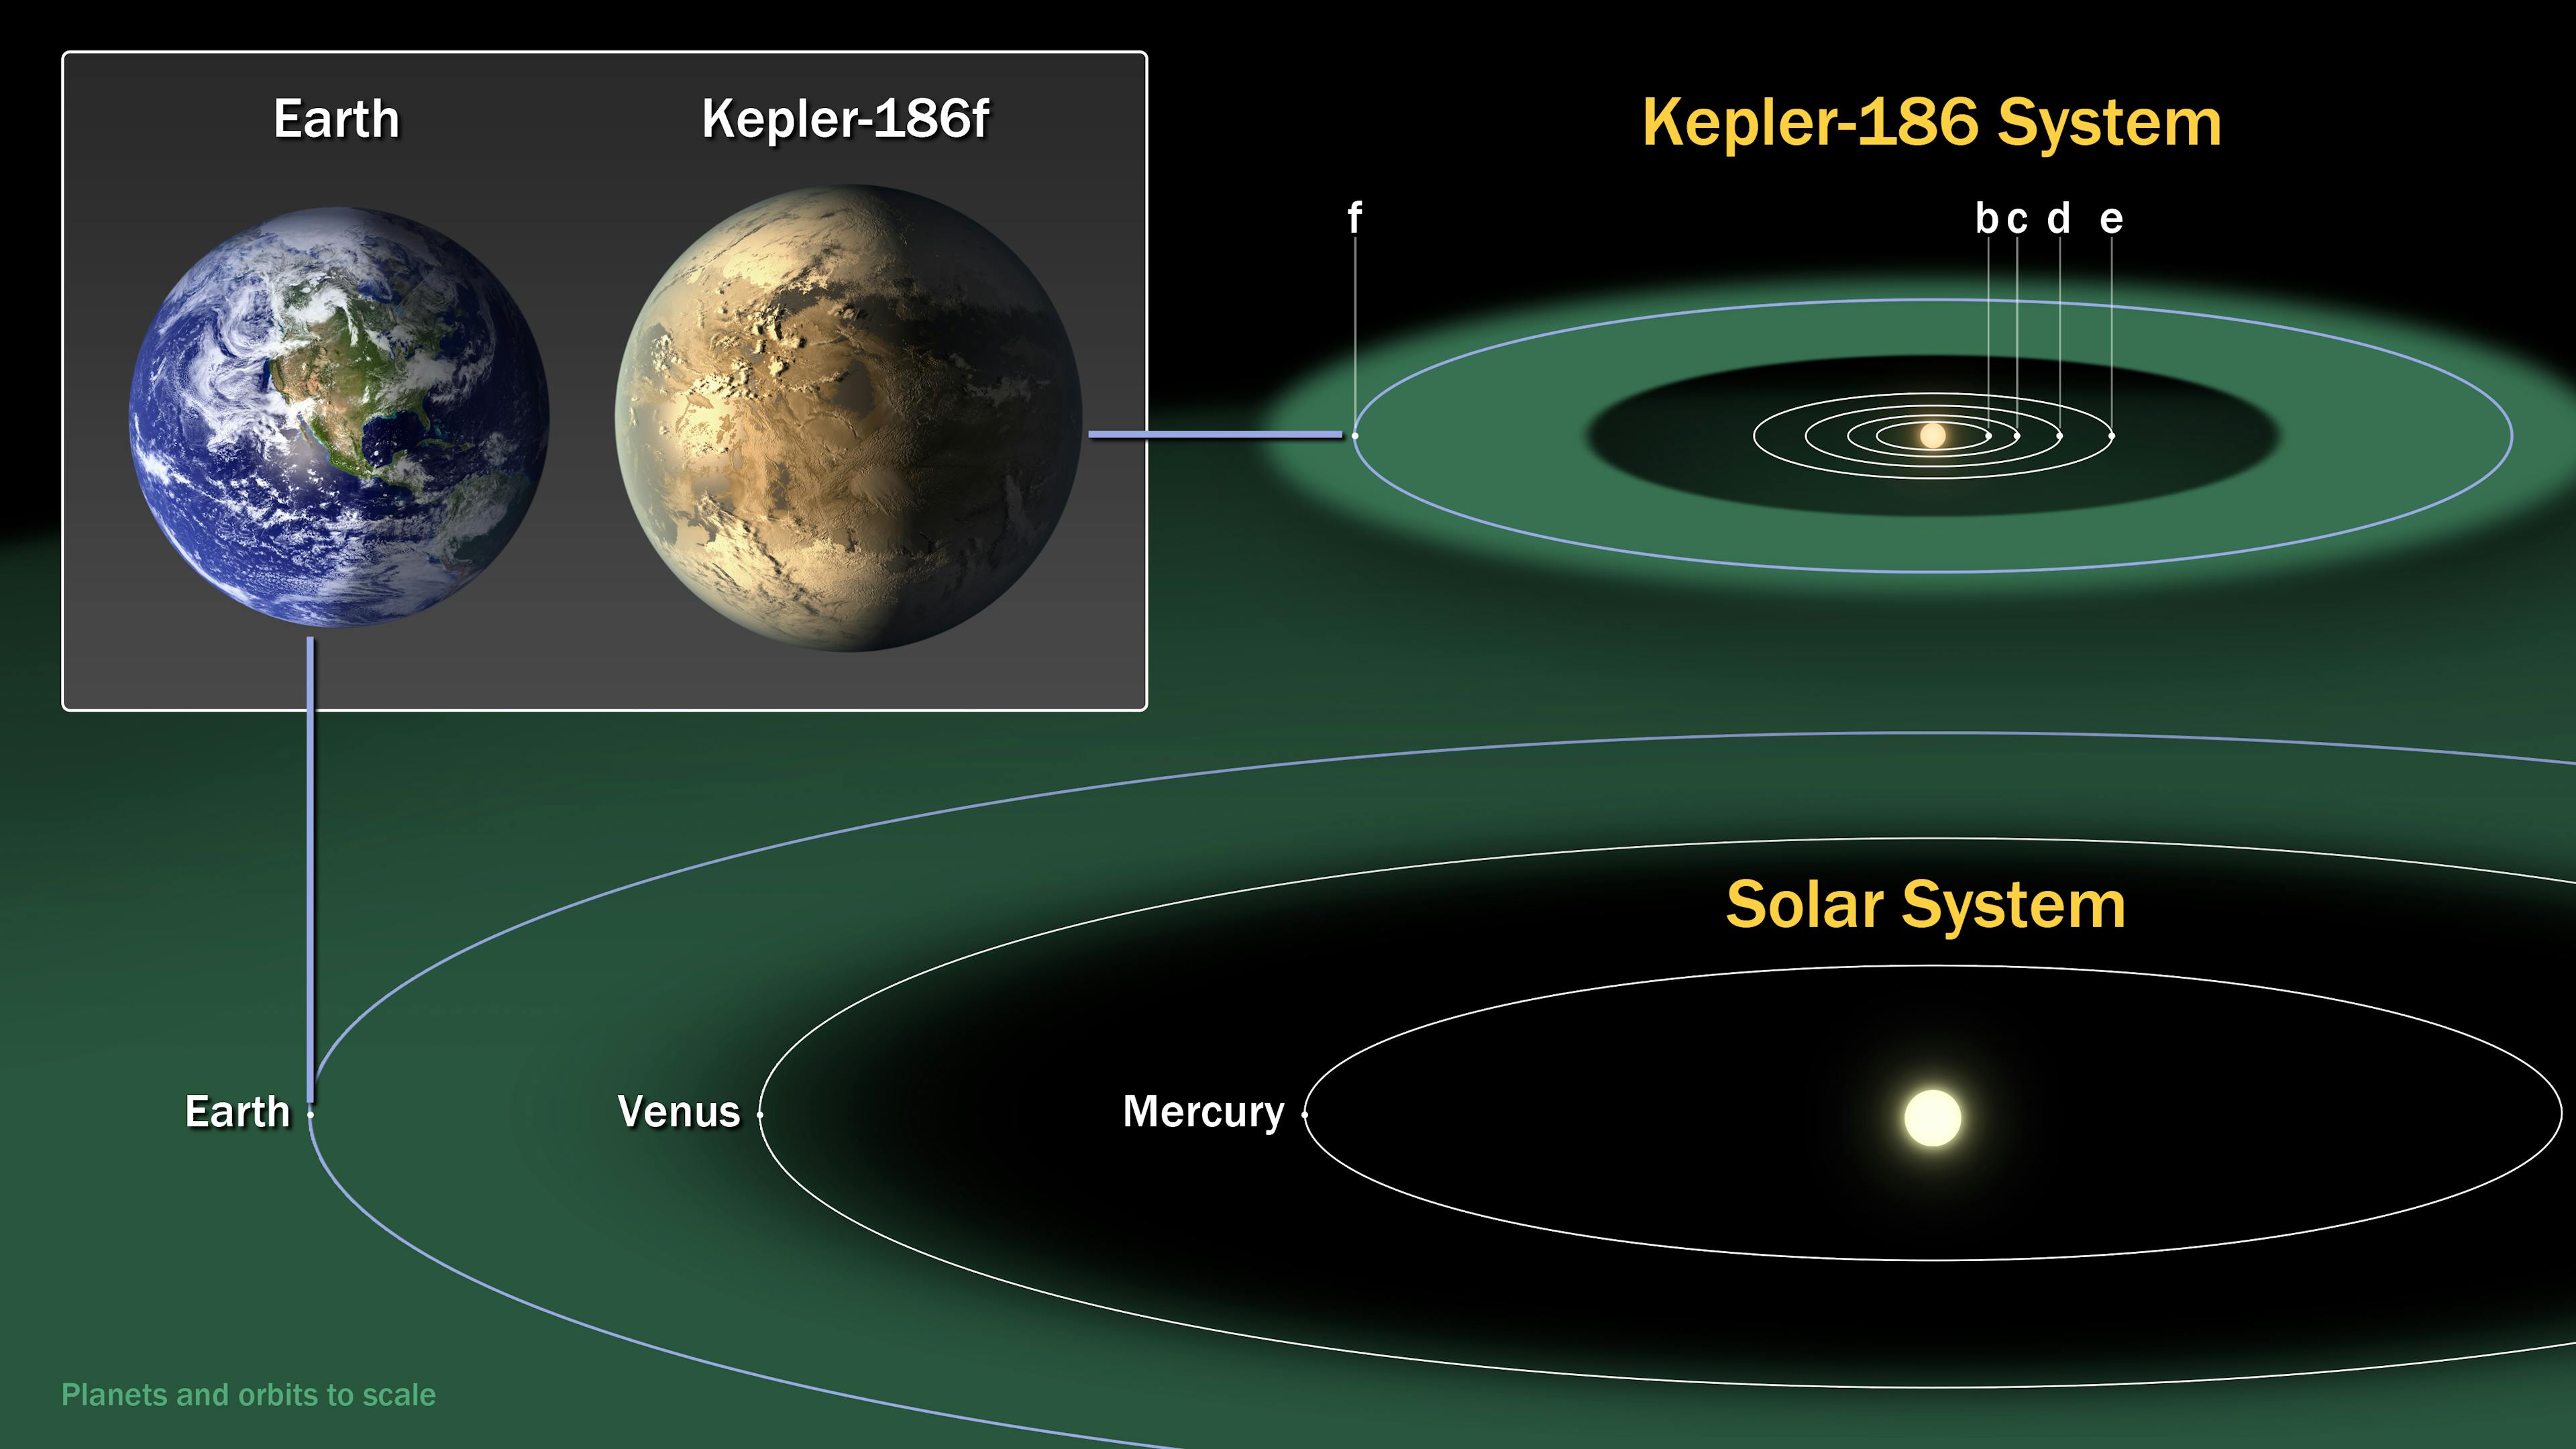 The diagram compares the planets of our inner solar system to Kepler-186, a five-planet star system about 500 light-years from Earth in the constellation Cygnus. The five planets of Kepler-186 orbit an M dwarf, a star that is is half the size and mass of the sun. Image Credit: NASA Ames/SETI Institute/JPL-Caltech